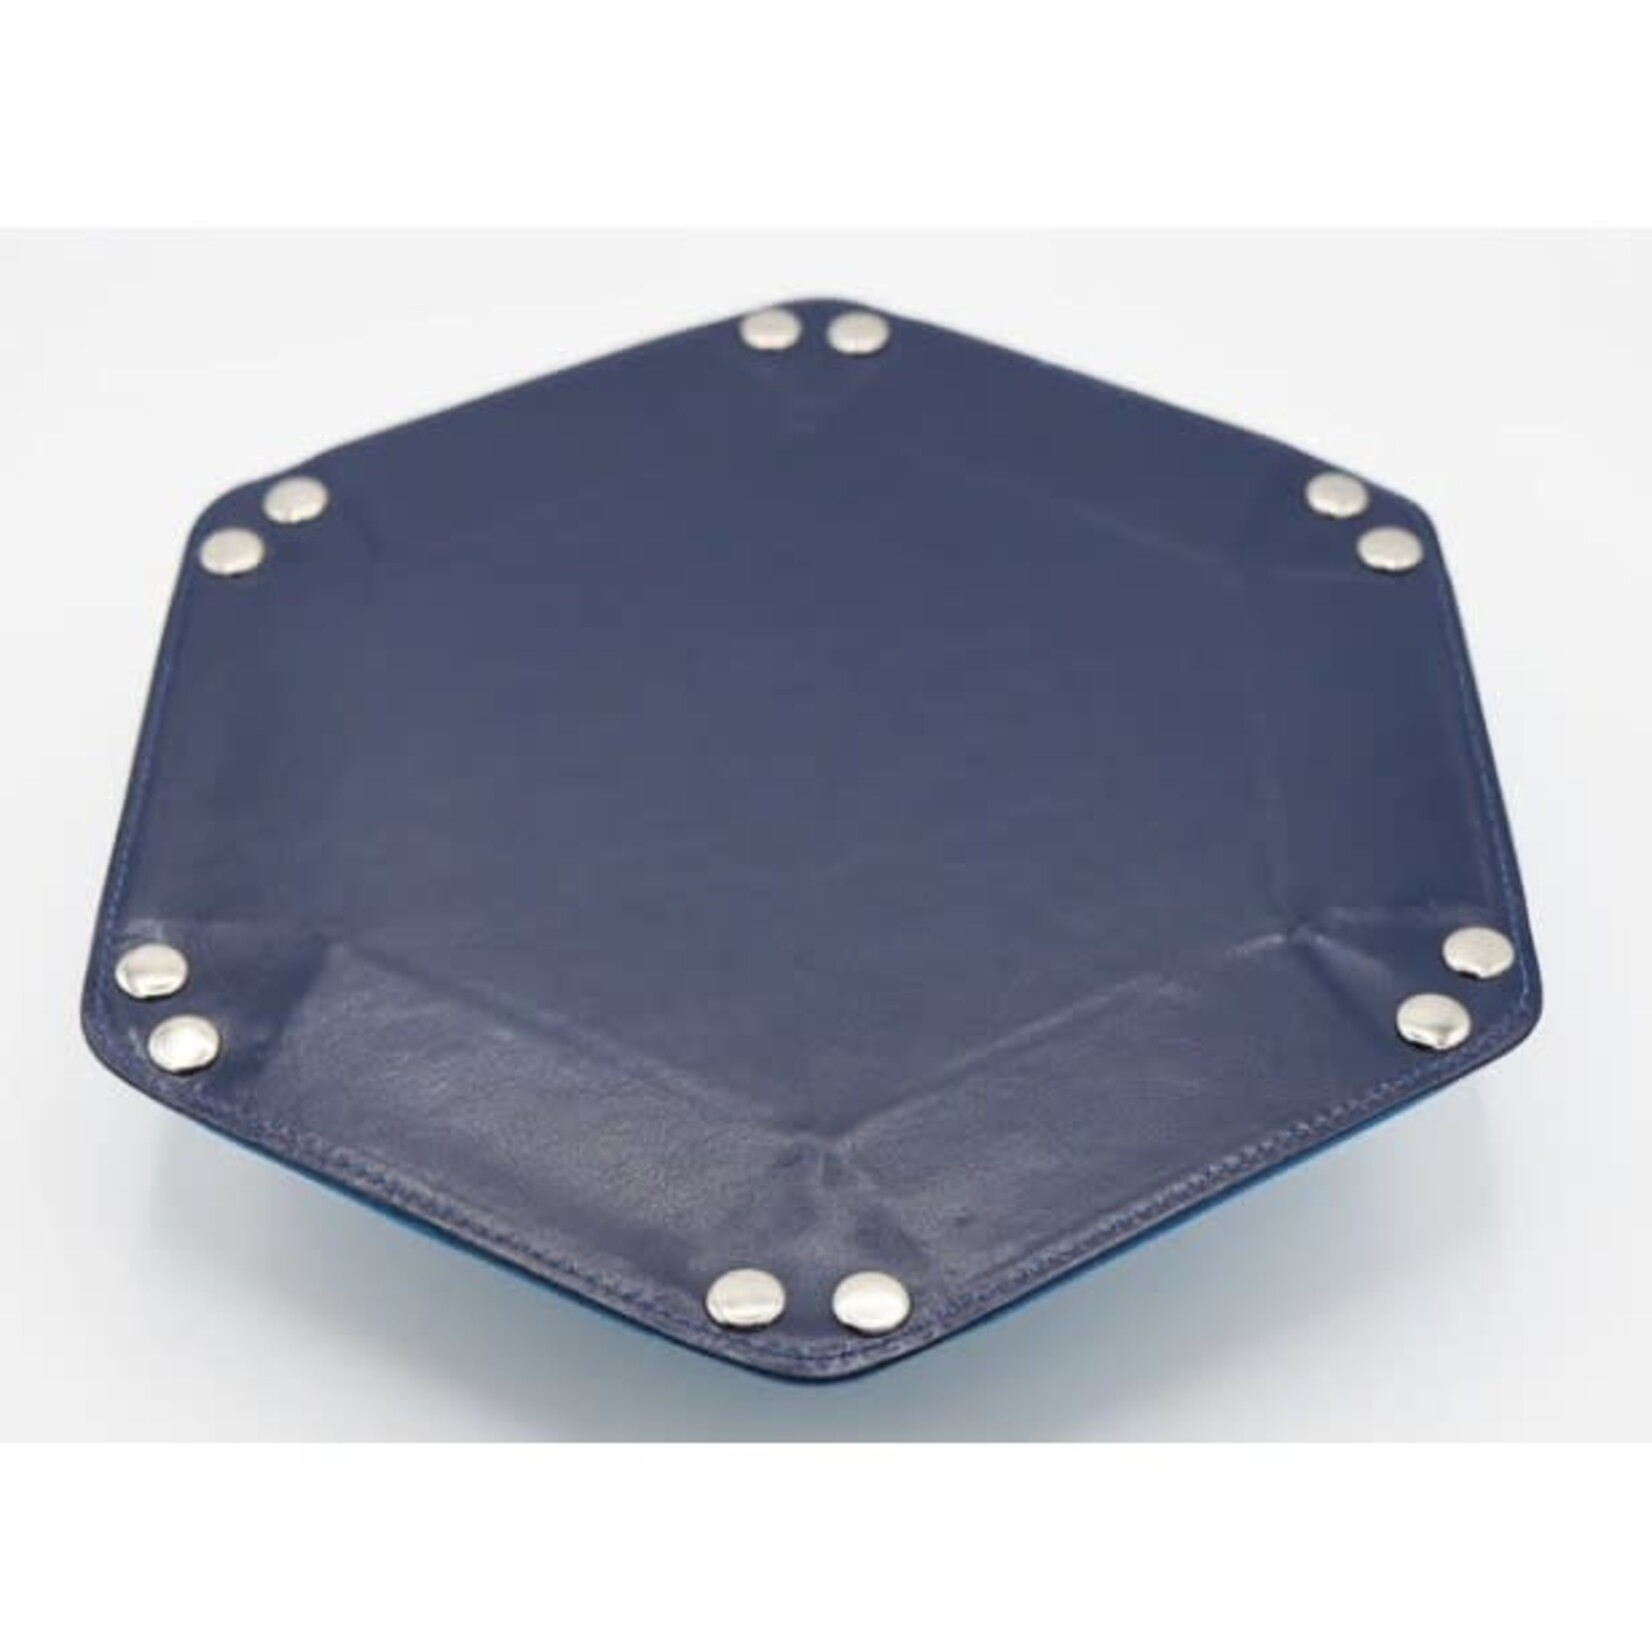 Foam Brain Leatherette & Velvet Hex Dice Tray: Navy with Teal